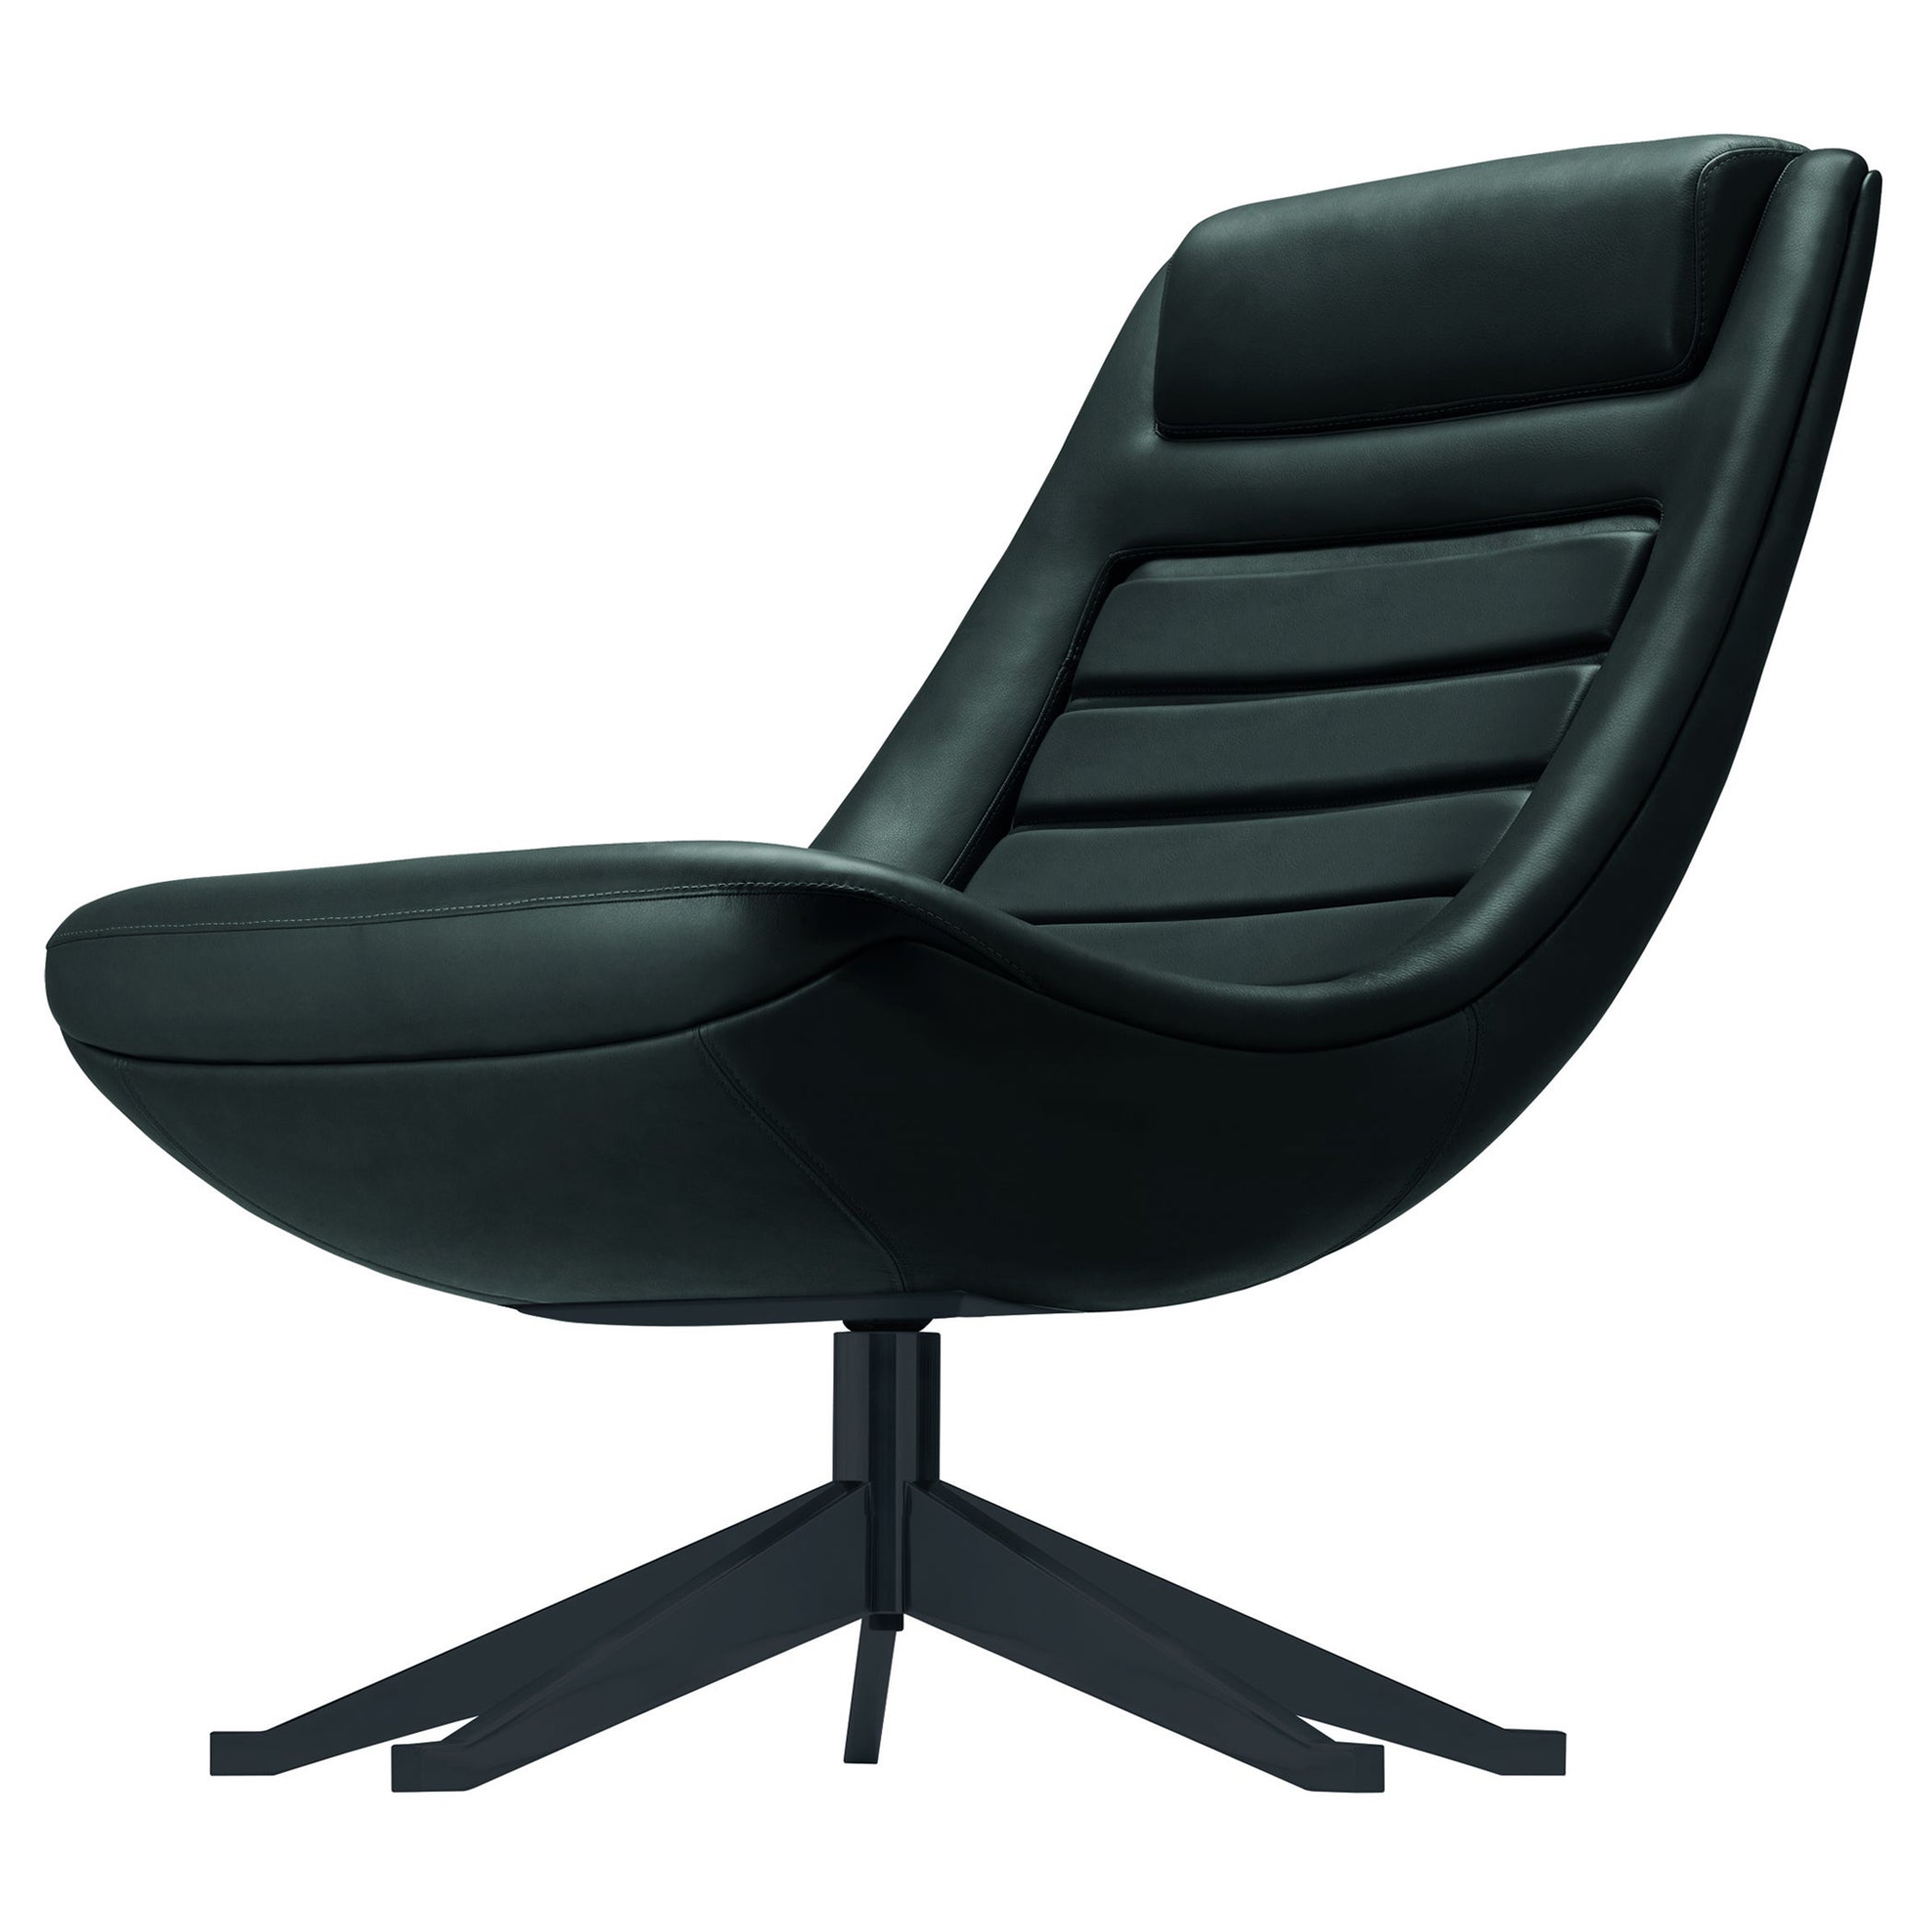 Alias 090 Manzù Lounge Chair in Black Leather Seat with Lacquered Aluminum Frame For Sale